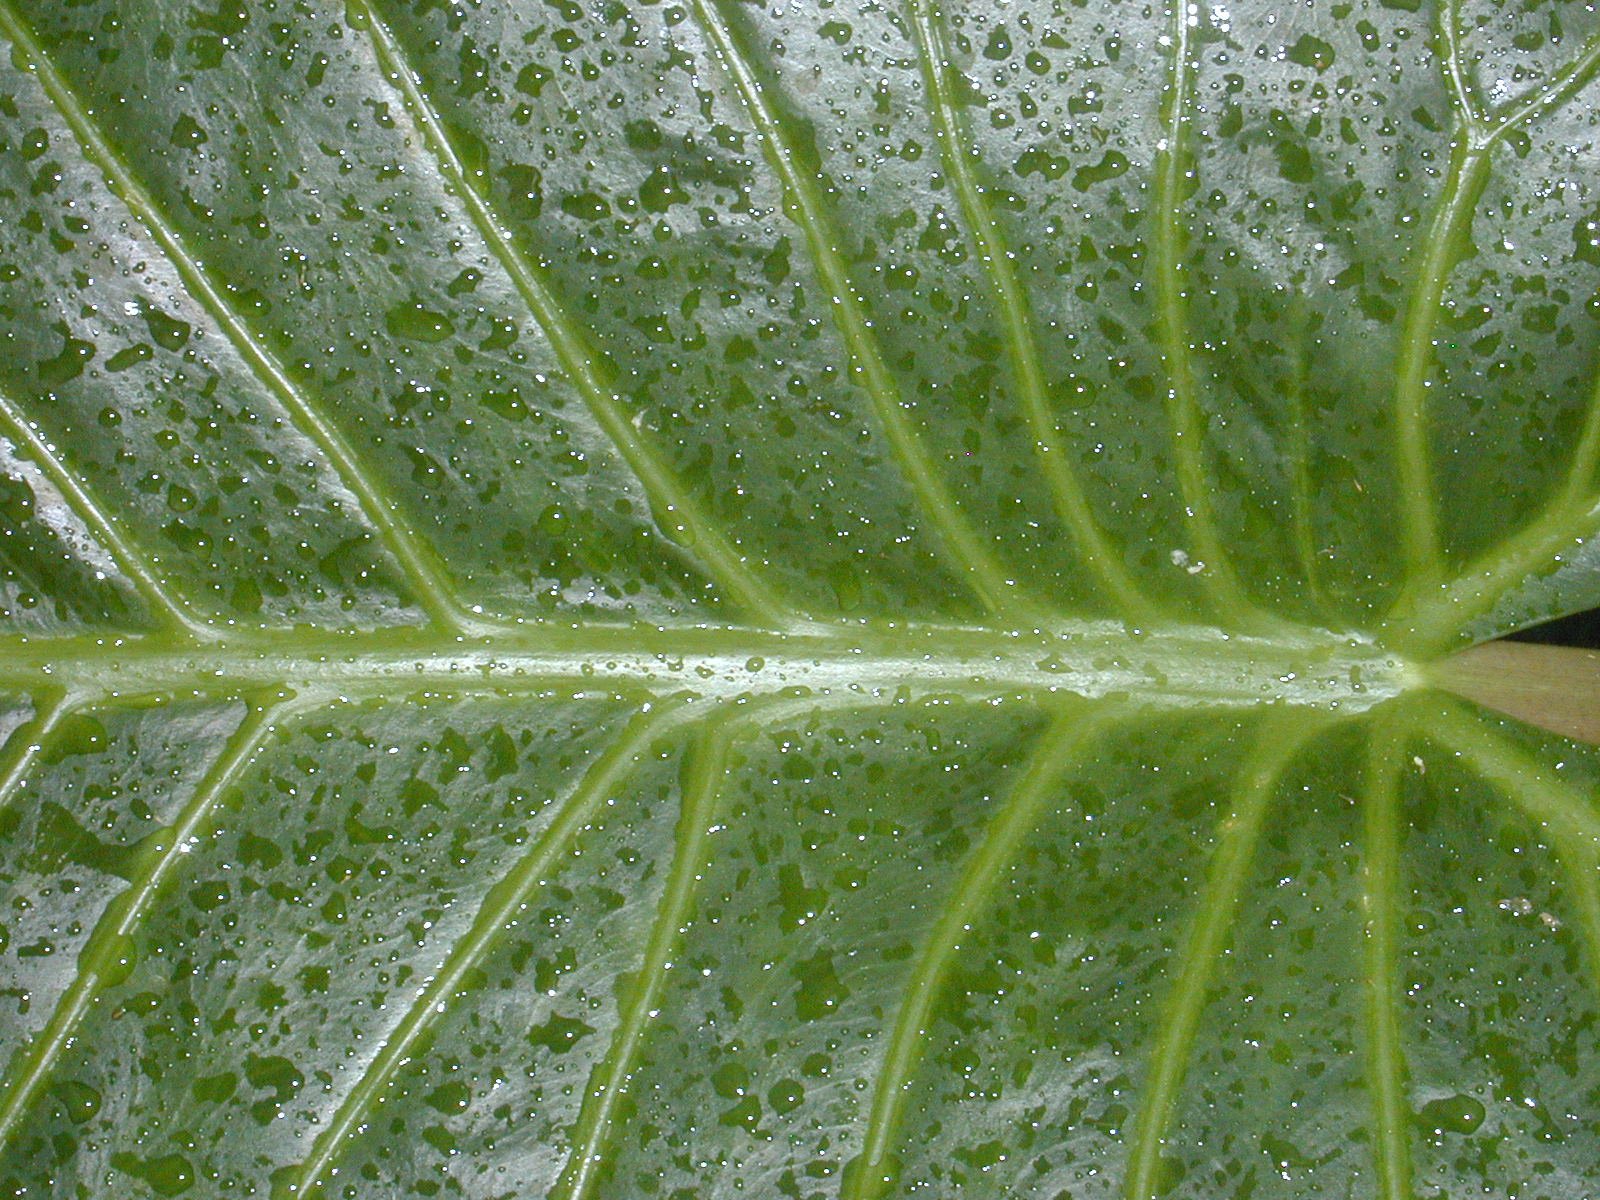 green leaf with water drops and a brown bird in the center